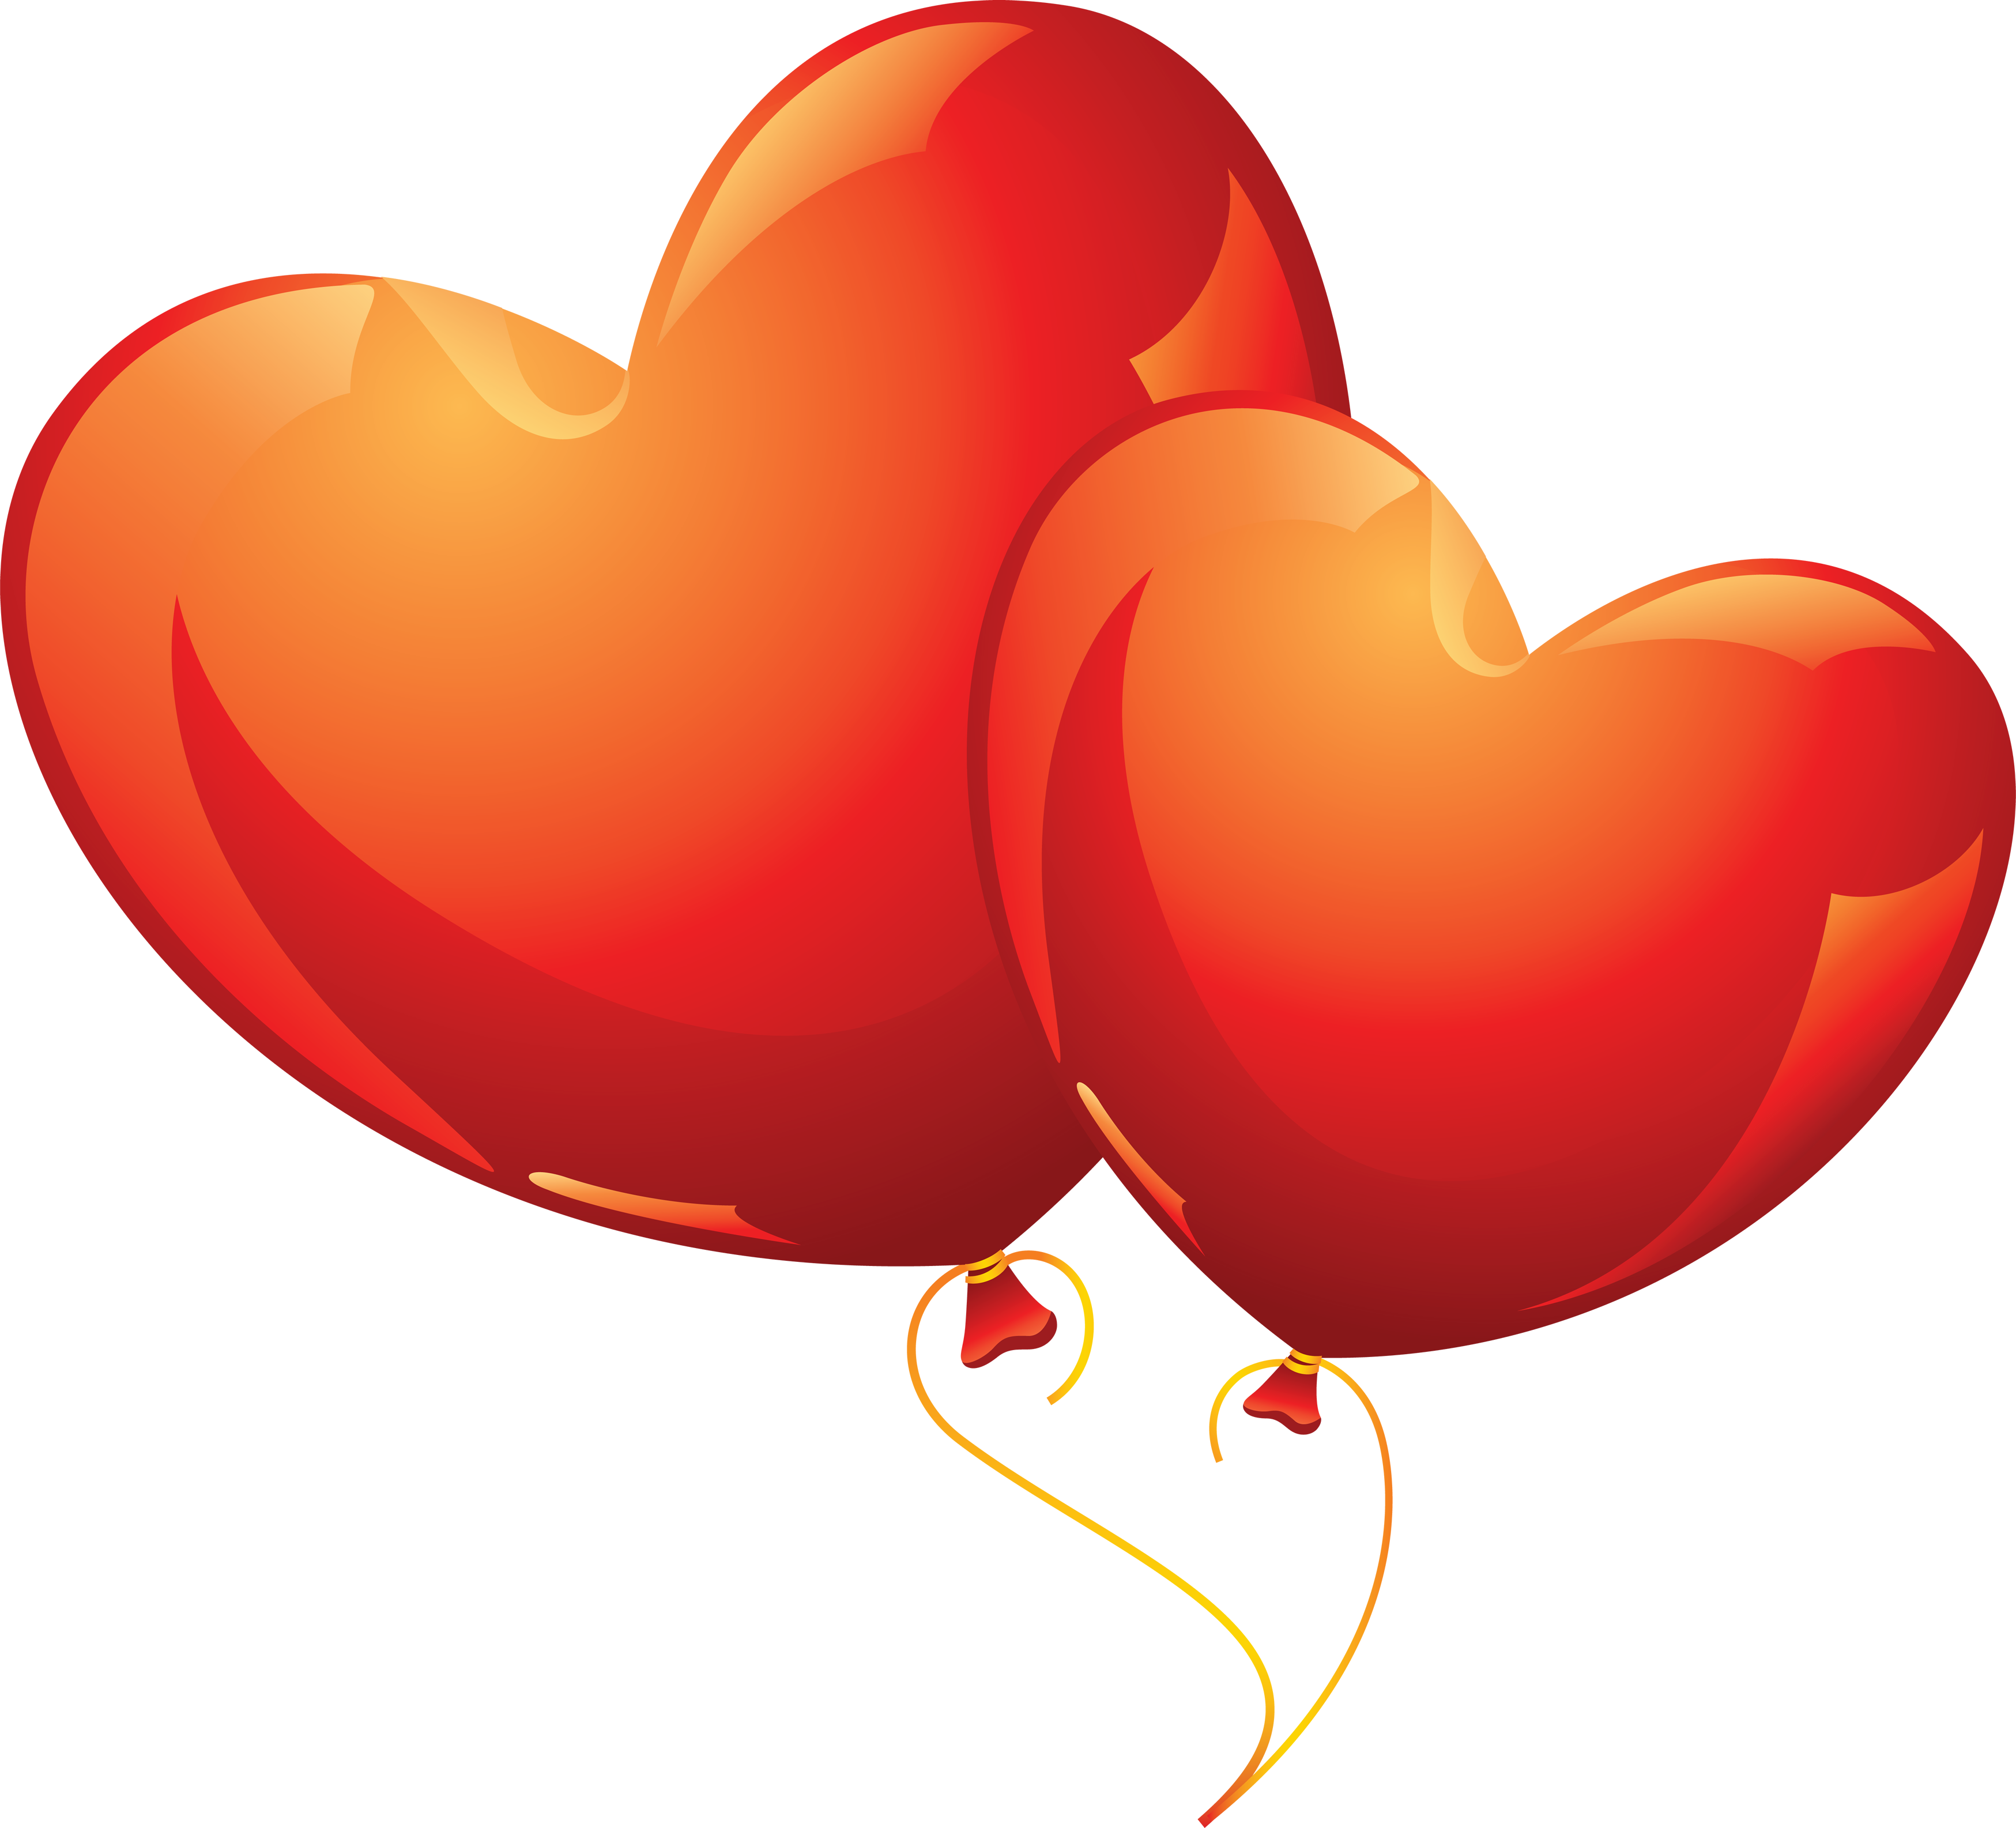 Balloon picture download with. Png images free